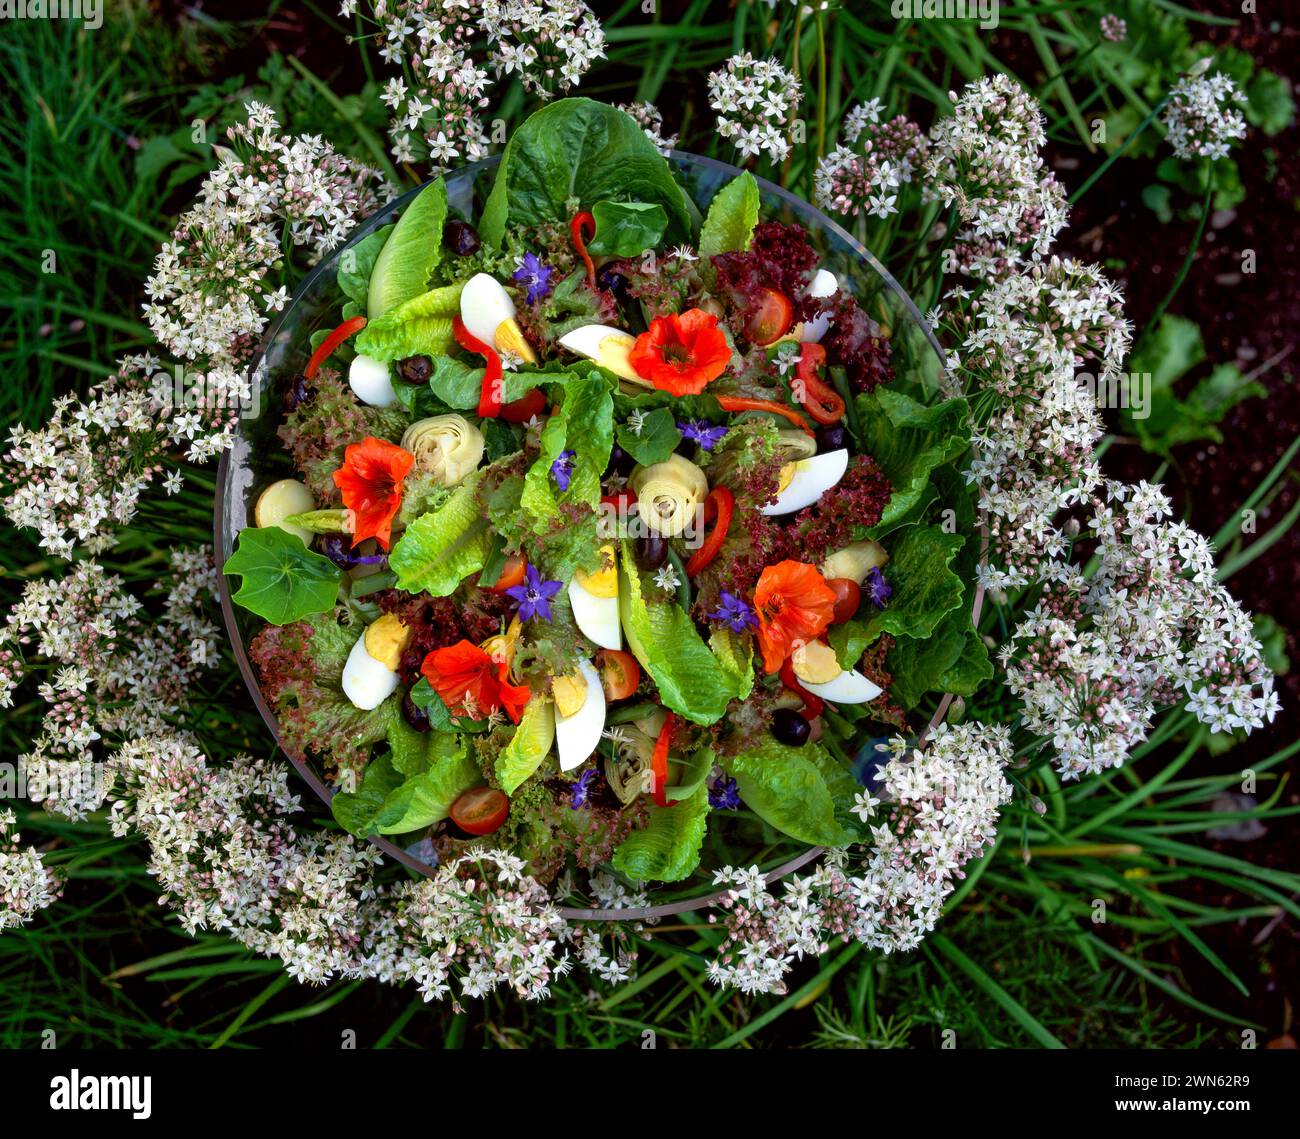 Salad of mixed lettuce, egg, aritchoke, red pepper, tomato, and wild flowers in a garden setting Stock Photo